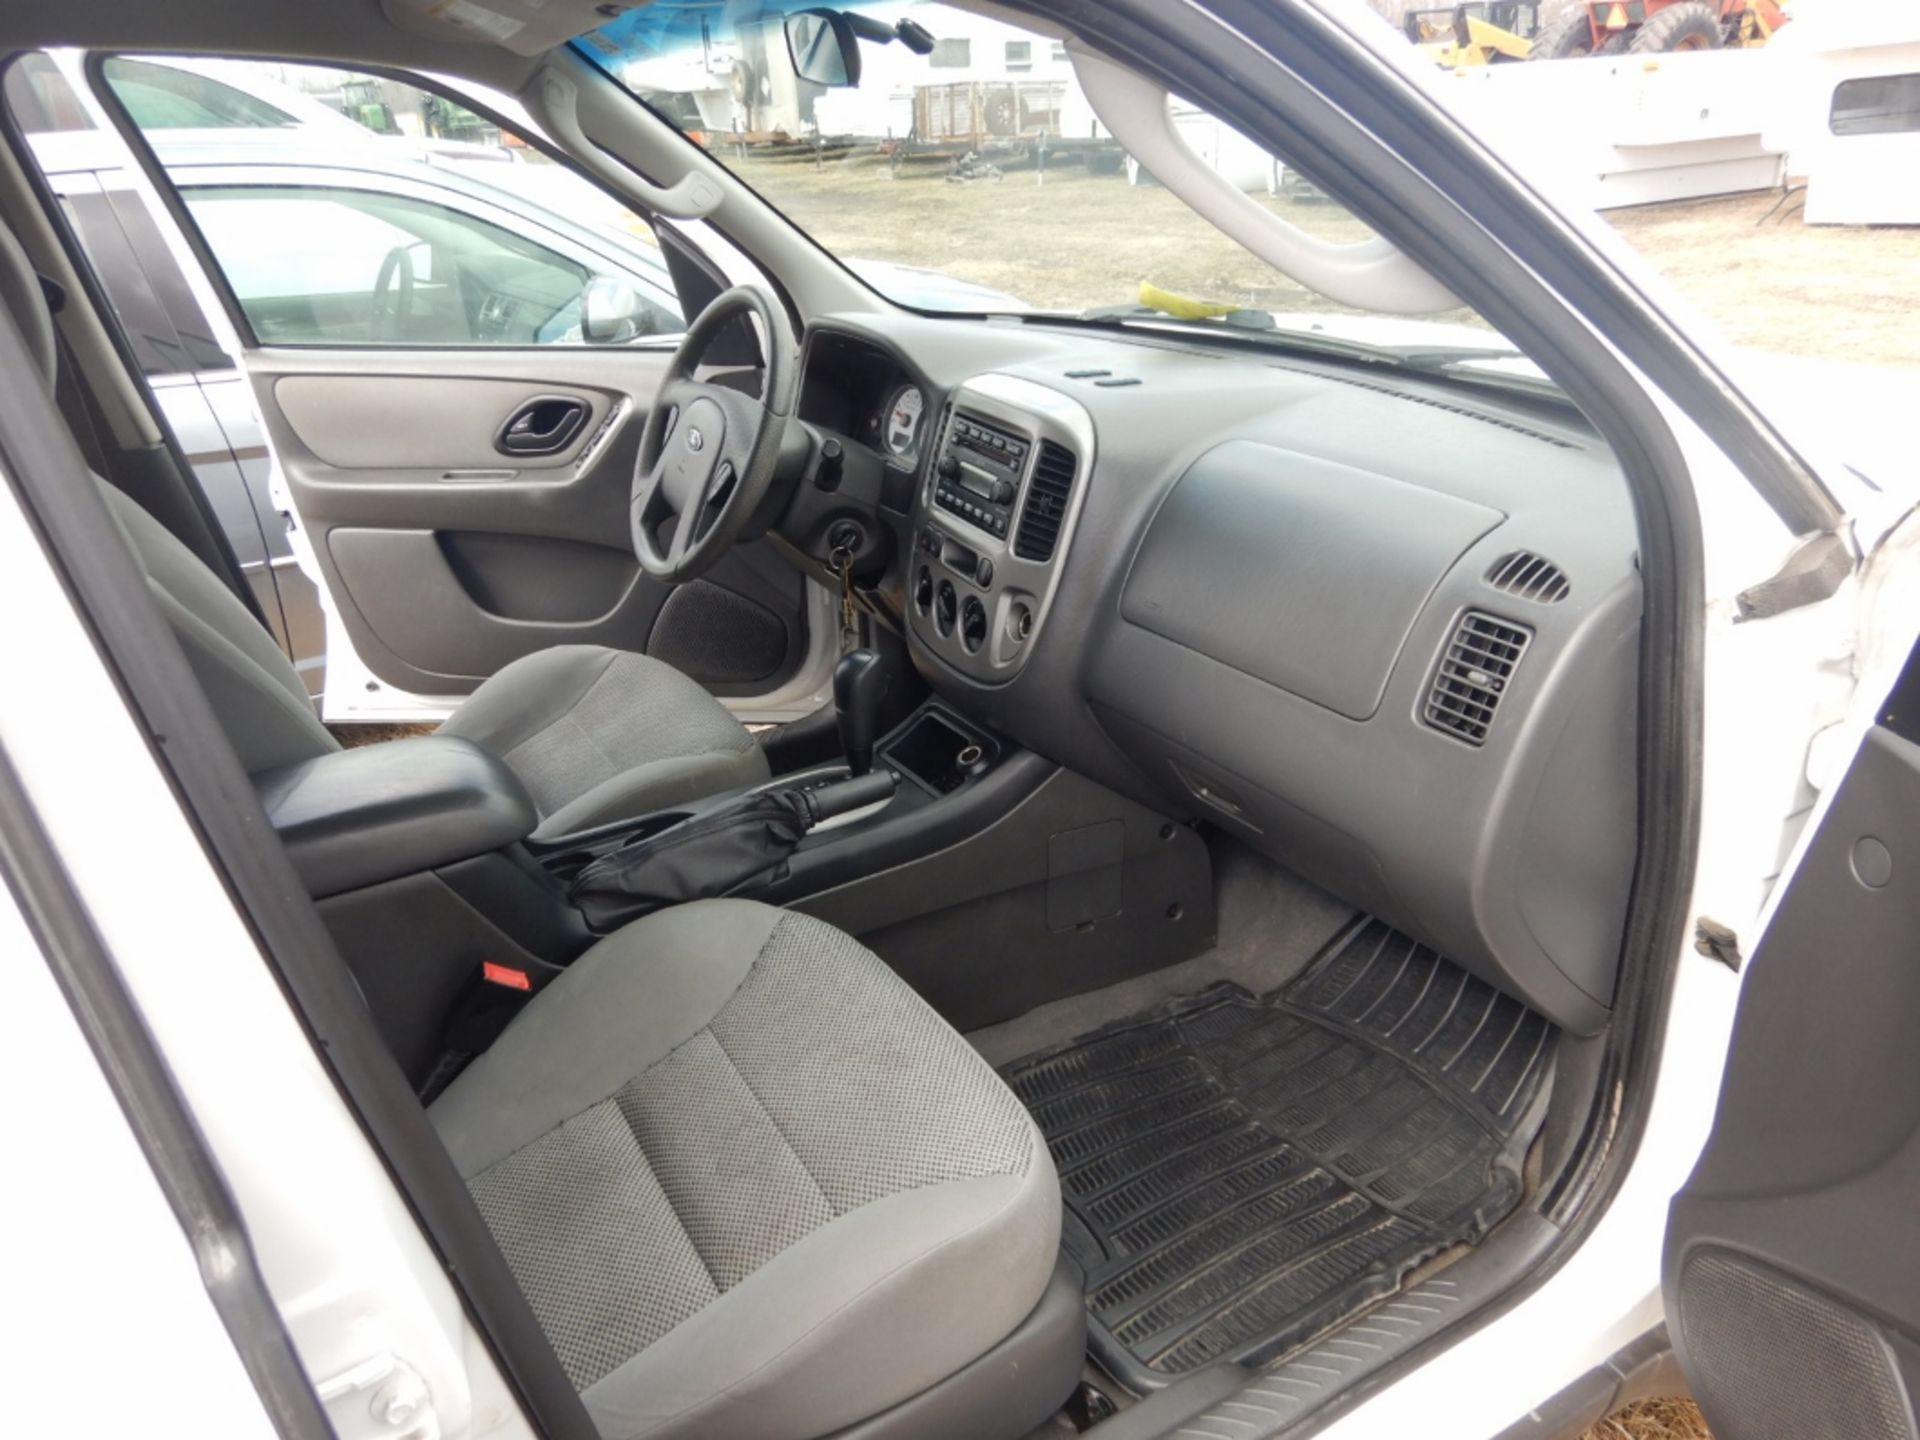 2005 FORD ESCAPE XLT, AWD, 3.0L V6, AUTOMATIC, POWER WINDOW, POWER DOOR LOCKS, 269,904 KM'S SHOWING, - Image 10 of 10